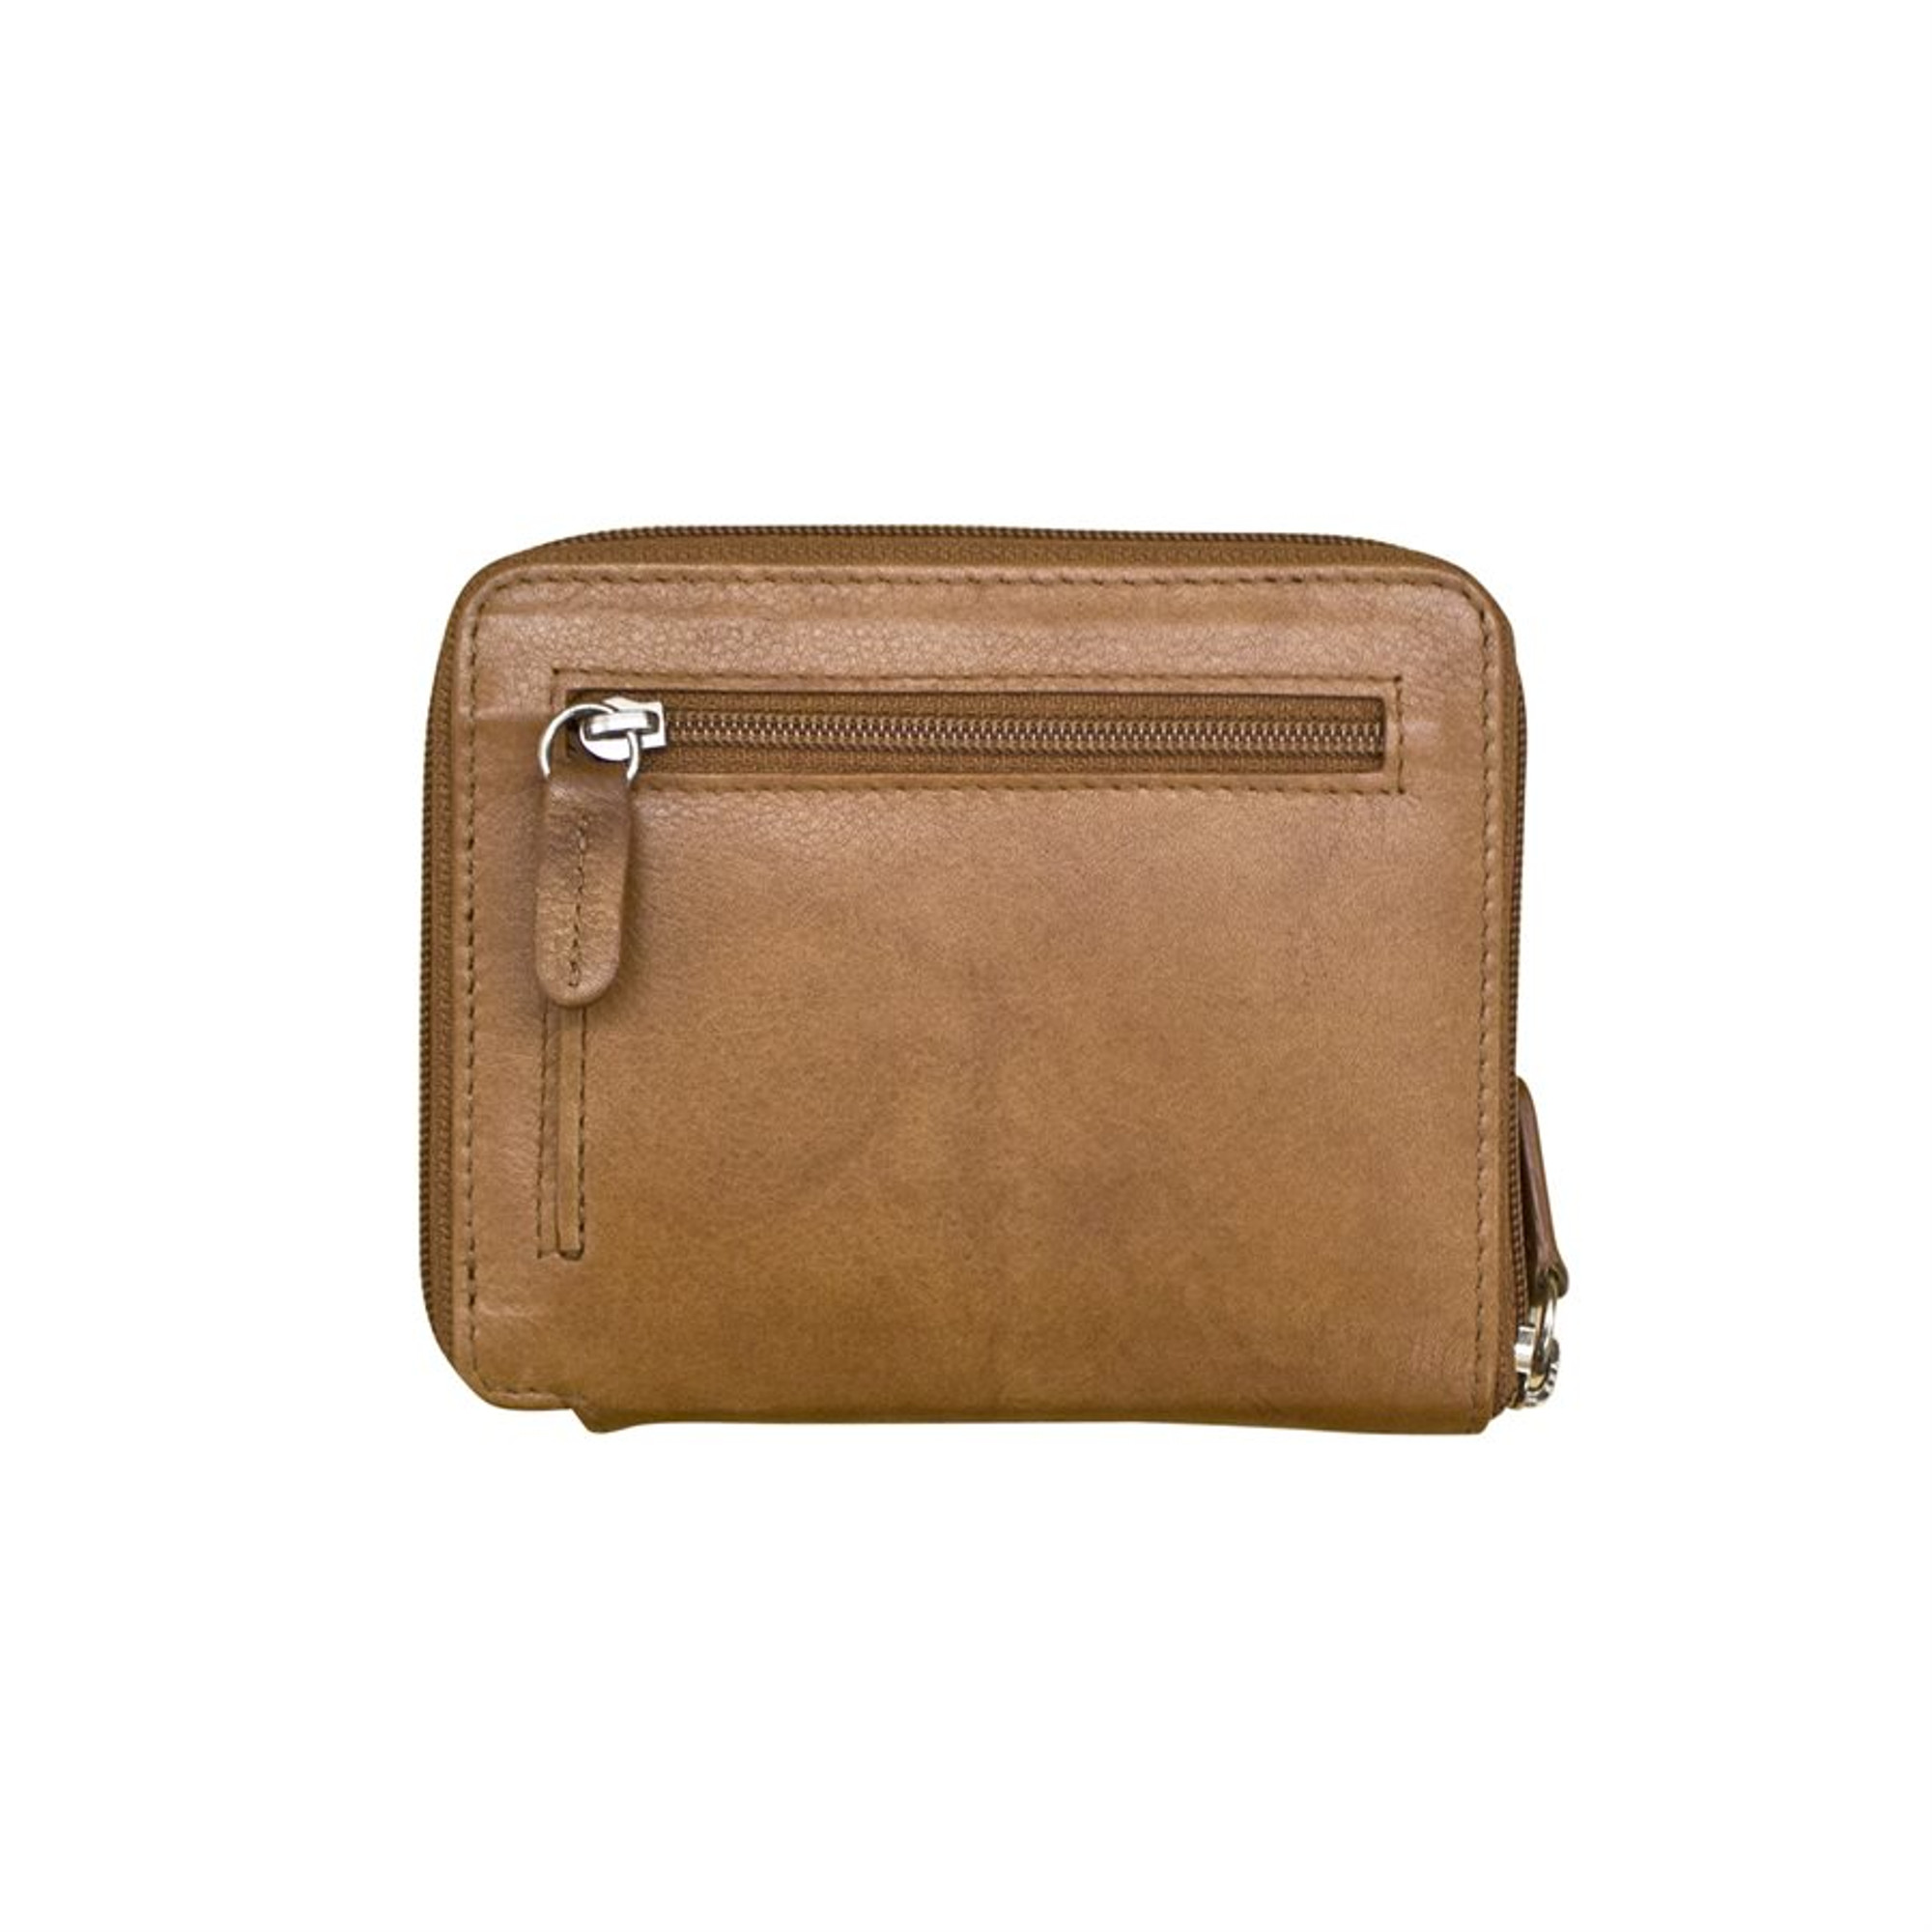 zip around wallet with RFID blocking lining. Exterior - I.D. - SUNSET  LEATHER